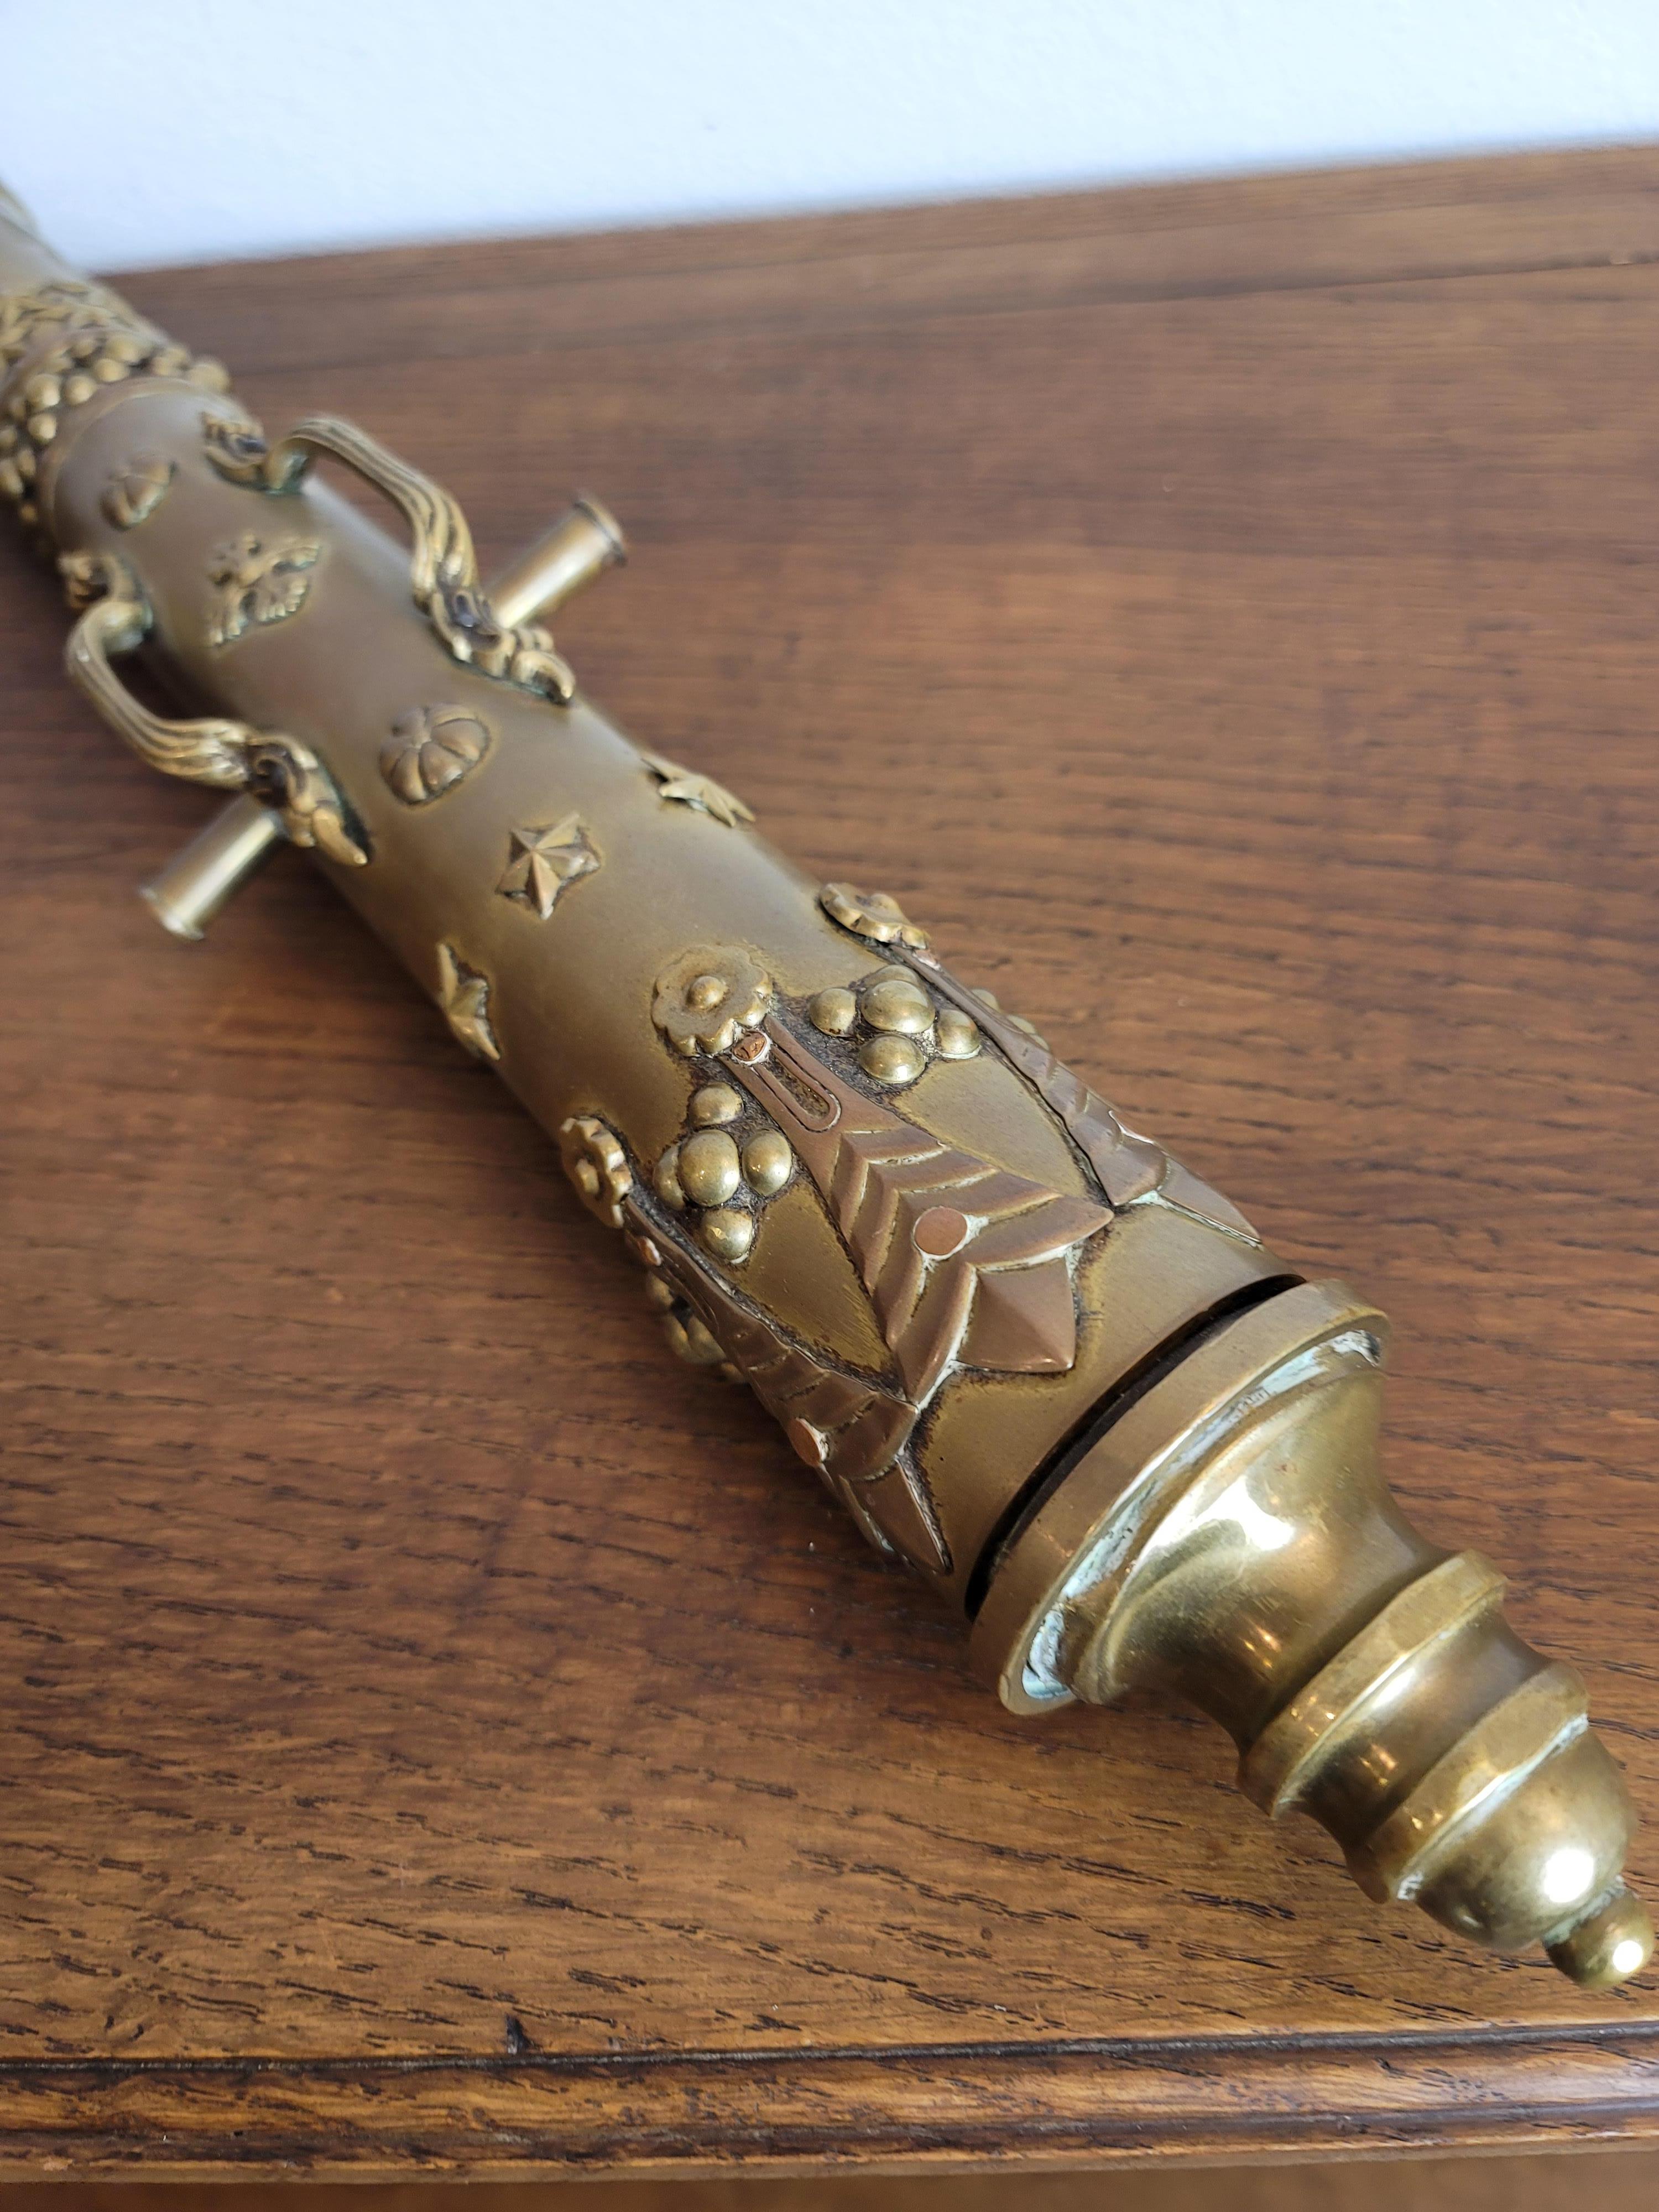 Large Antique English Trench Art Table Cannon In Good Condition For Sale In Forney, TX